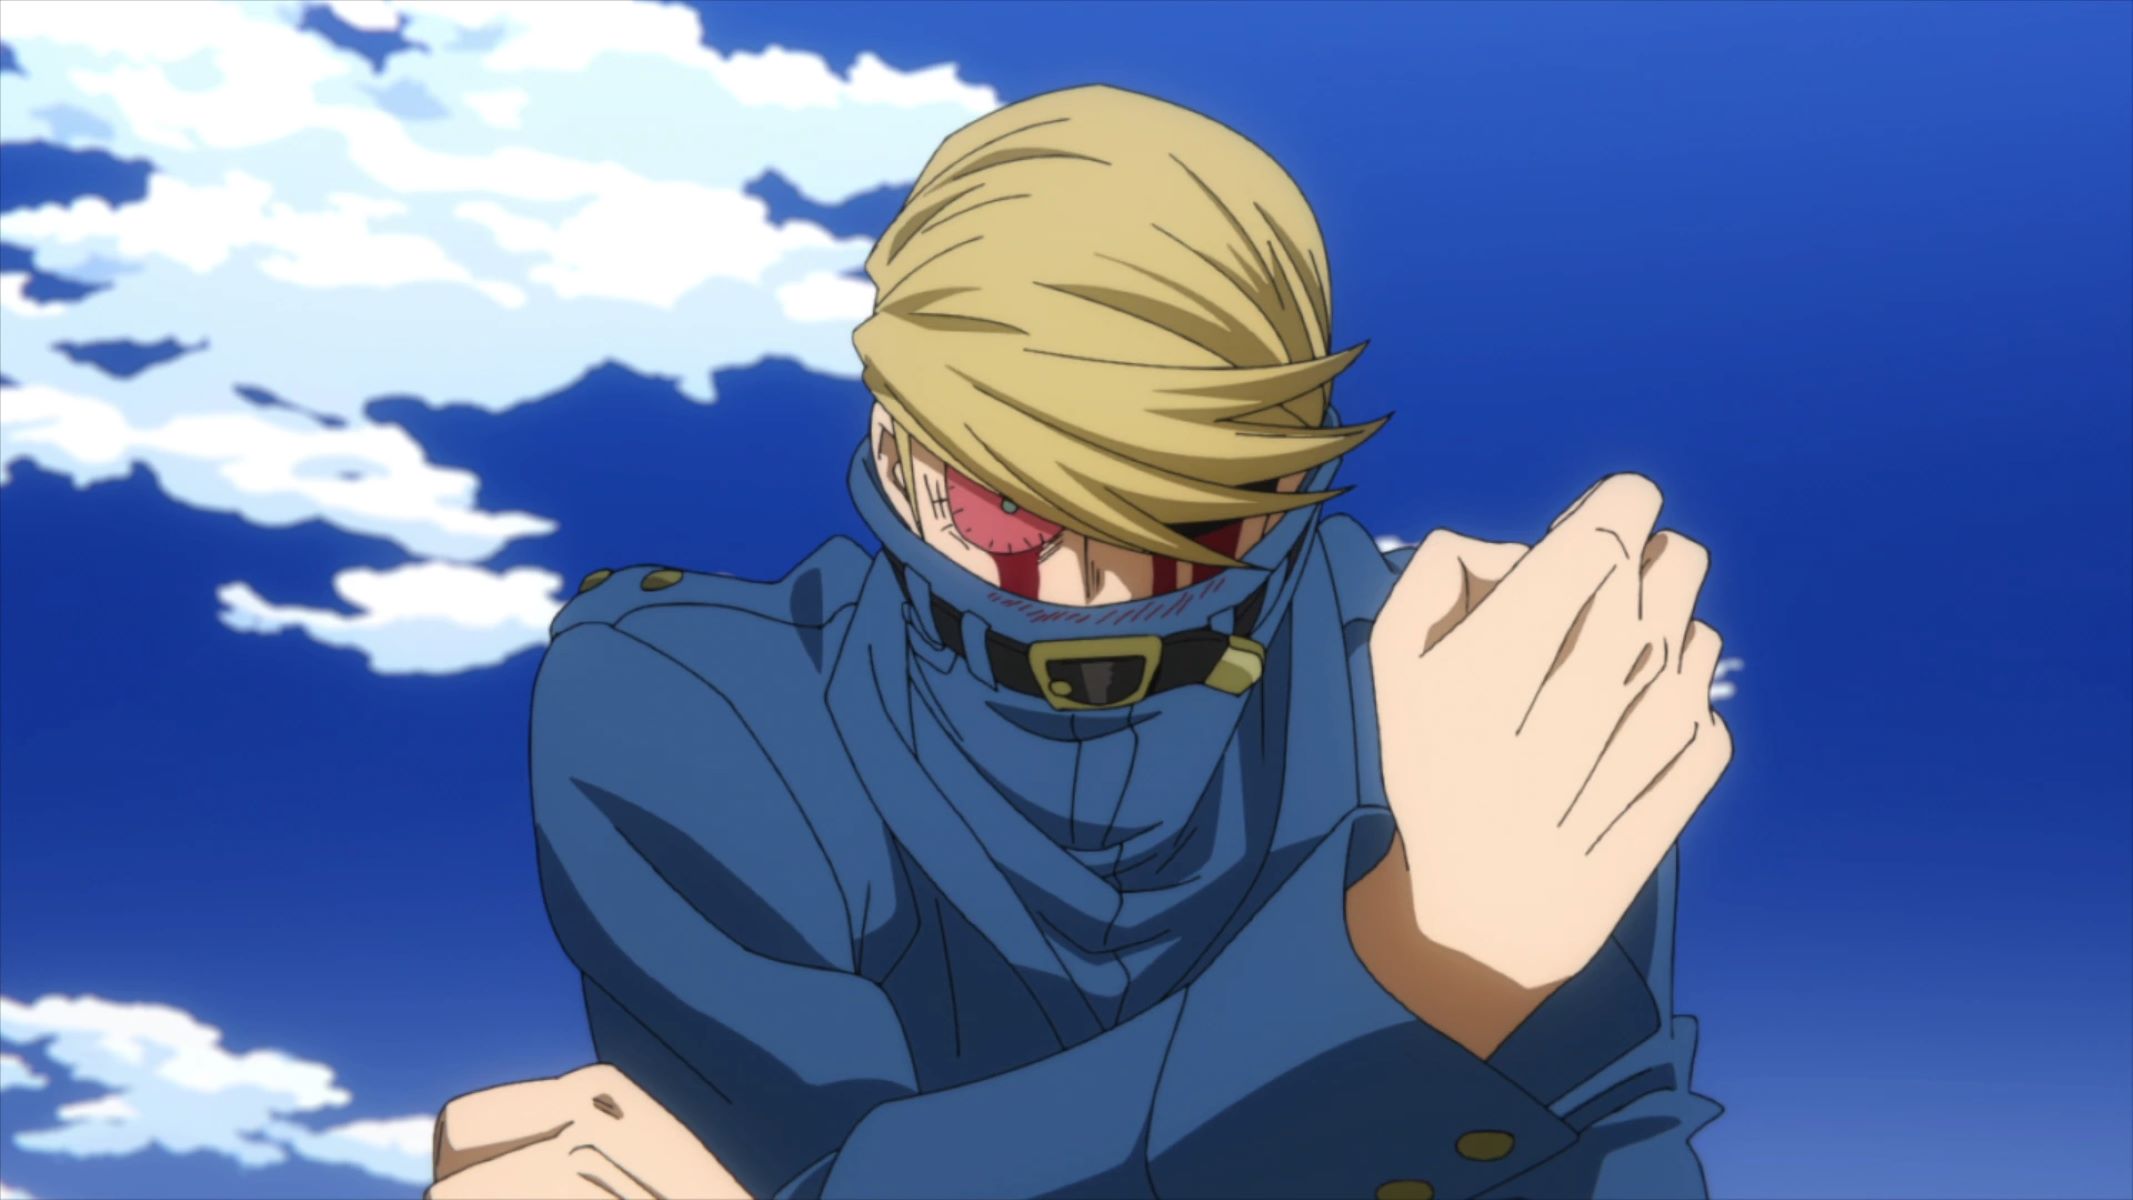 The Surprising Reason Behind Best Jeanist’s Extraordinary Neck Length